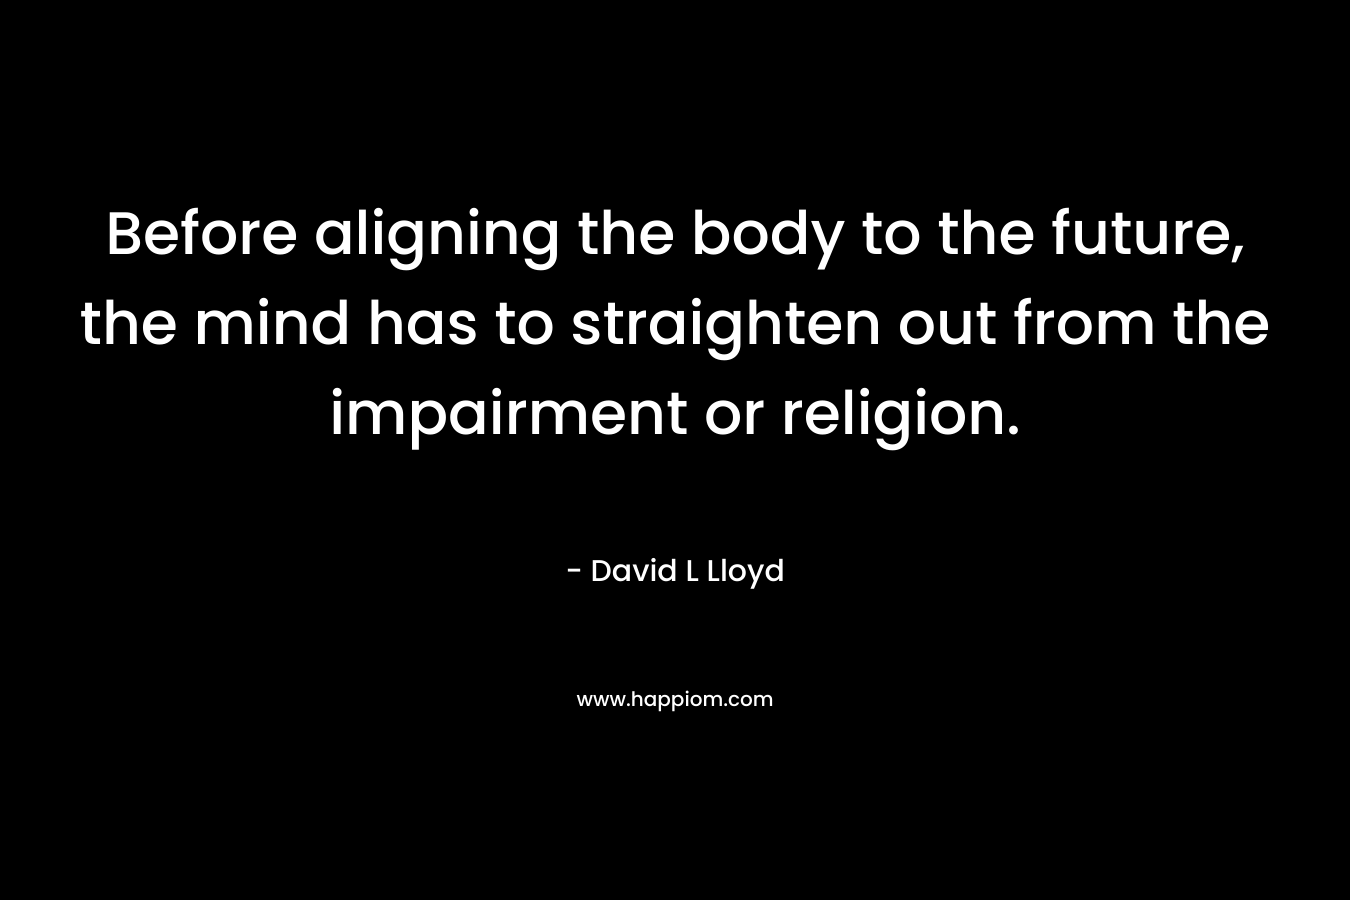 Before aligning the body to the future, the mind has to straighten out from the impairment or religion. – David L Lloyd